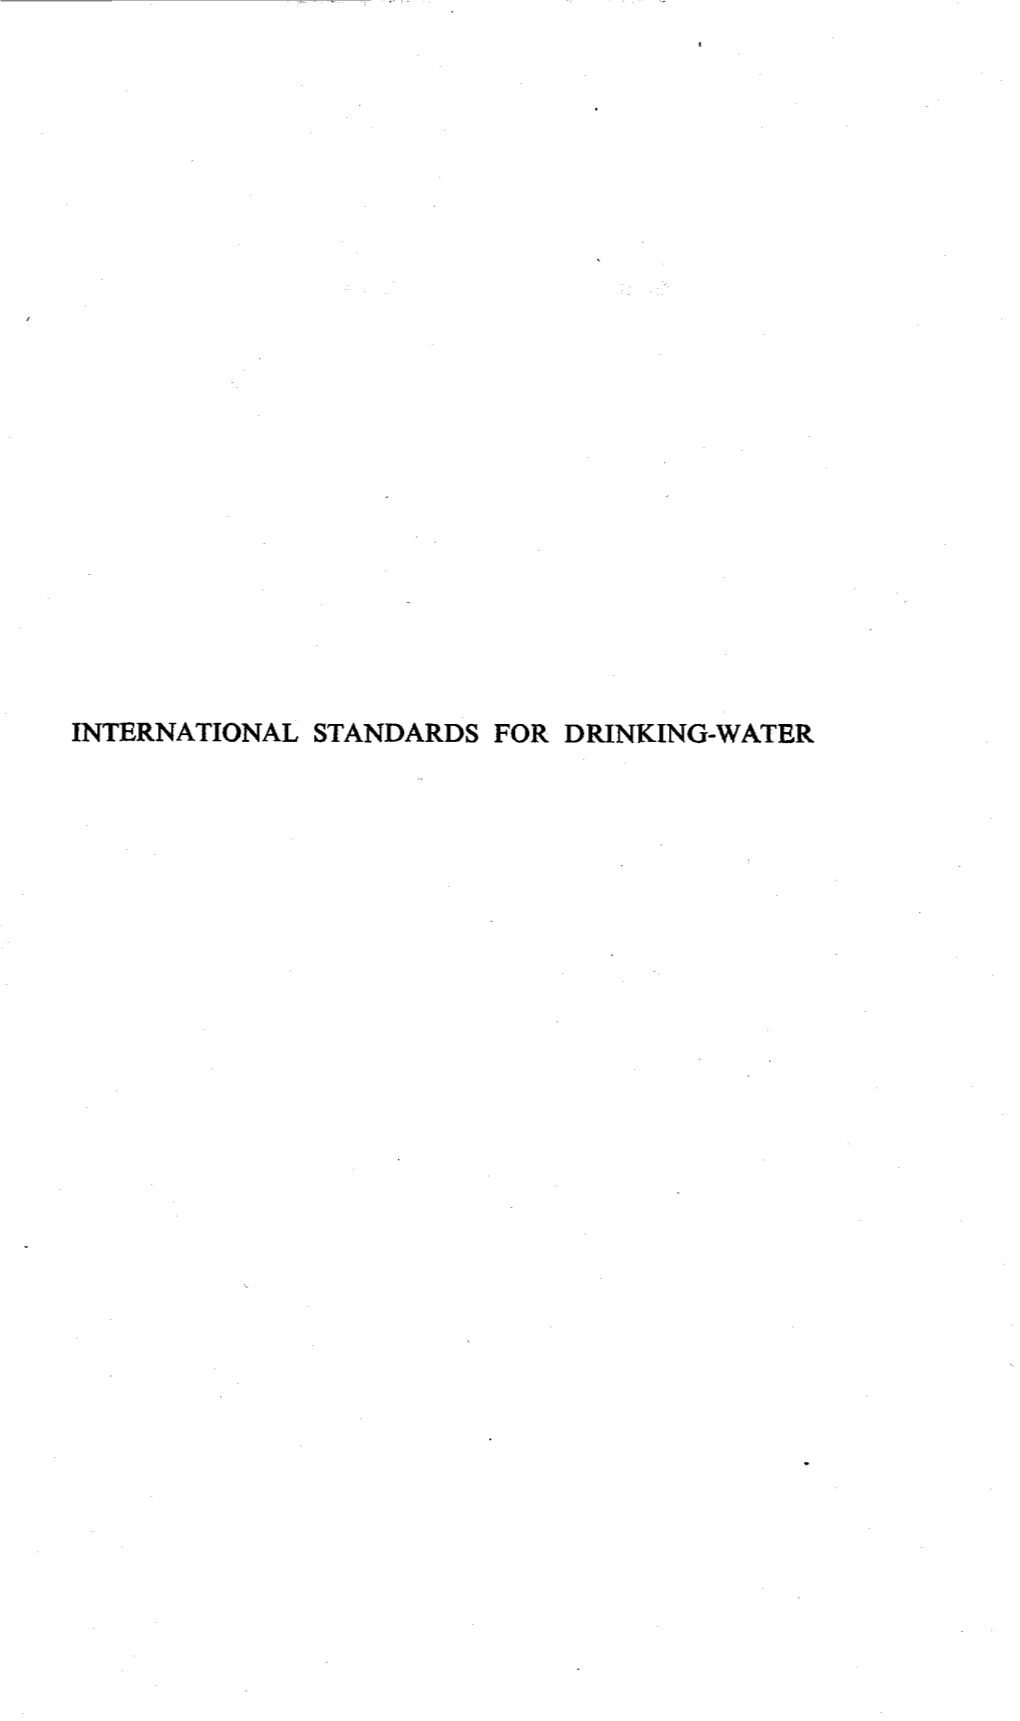 International Standards for Drinking-Water